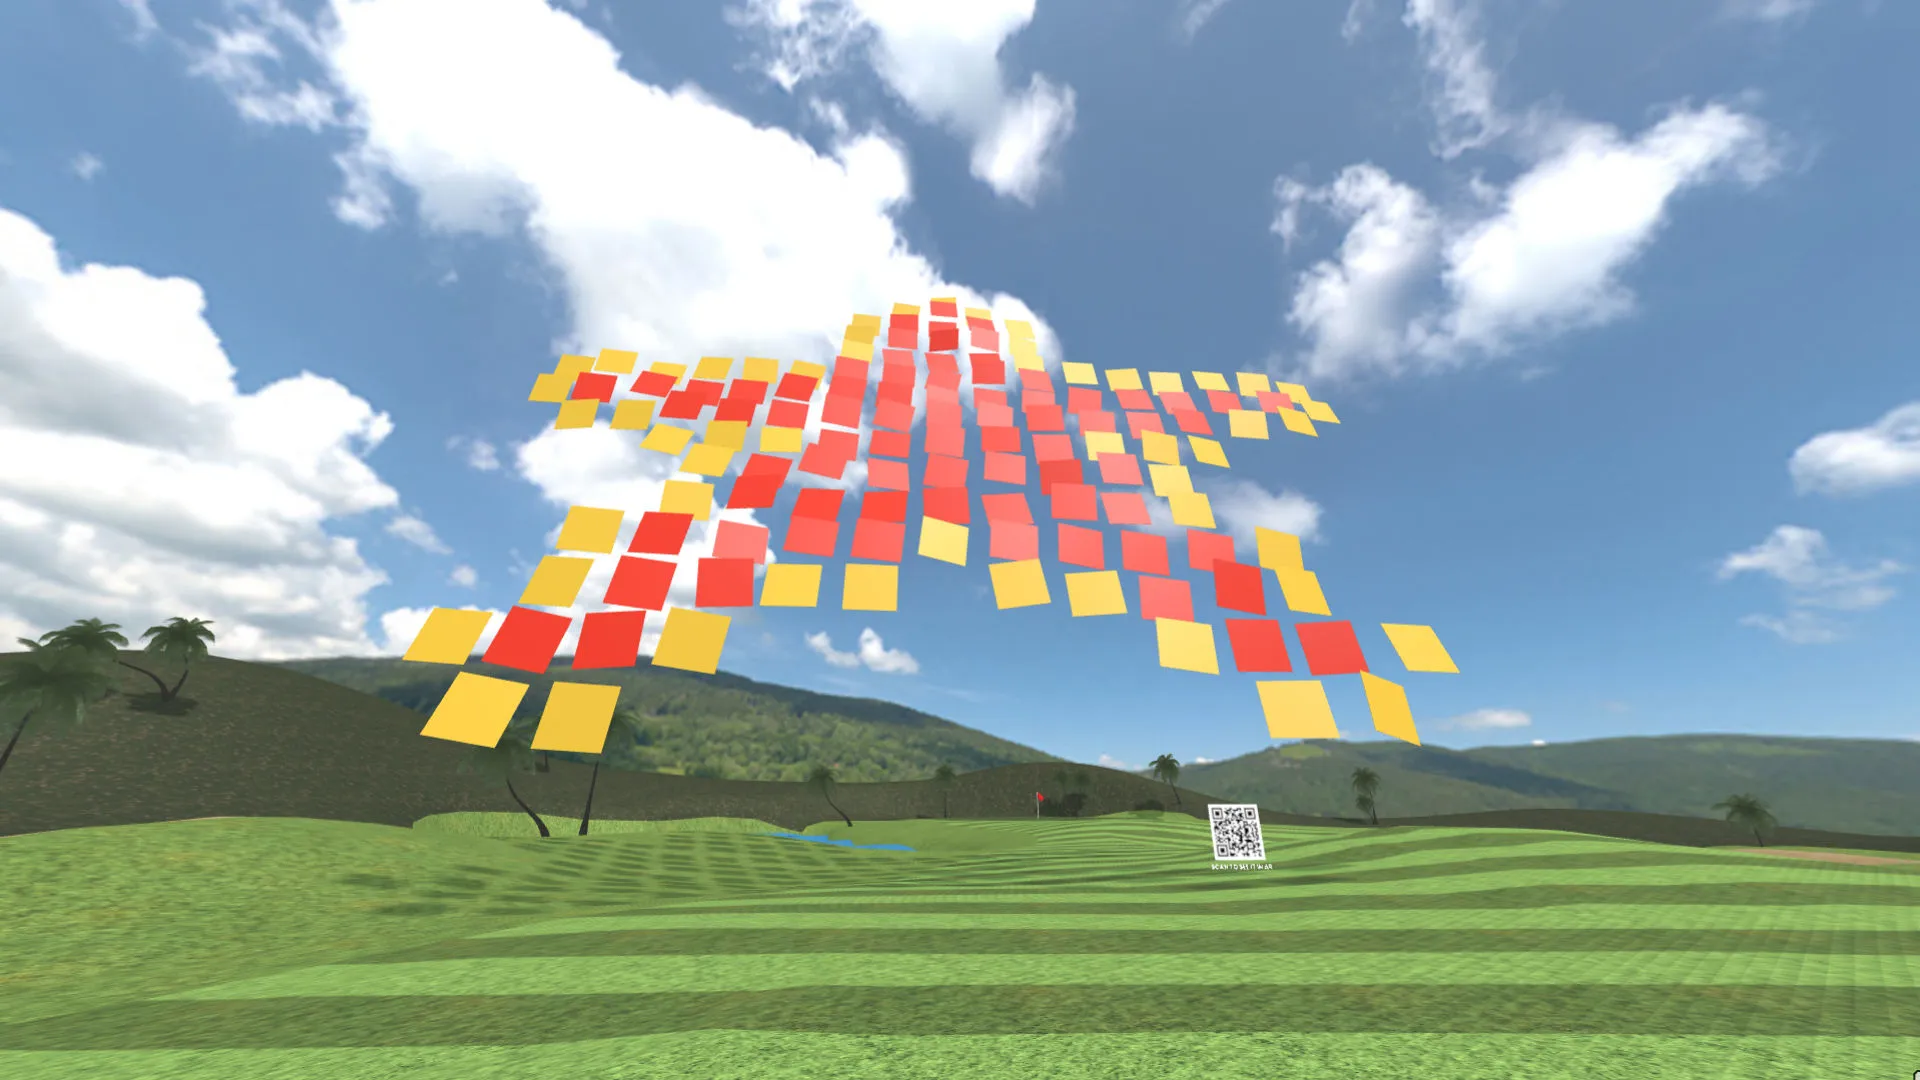 A star formed with red and yellow pixels floating in an open field, an example picture of an XR scene in the metaverse